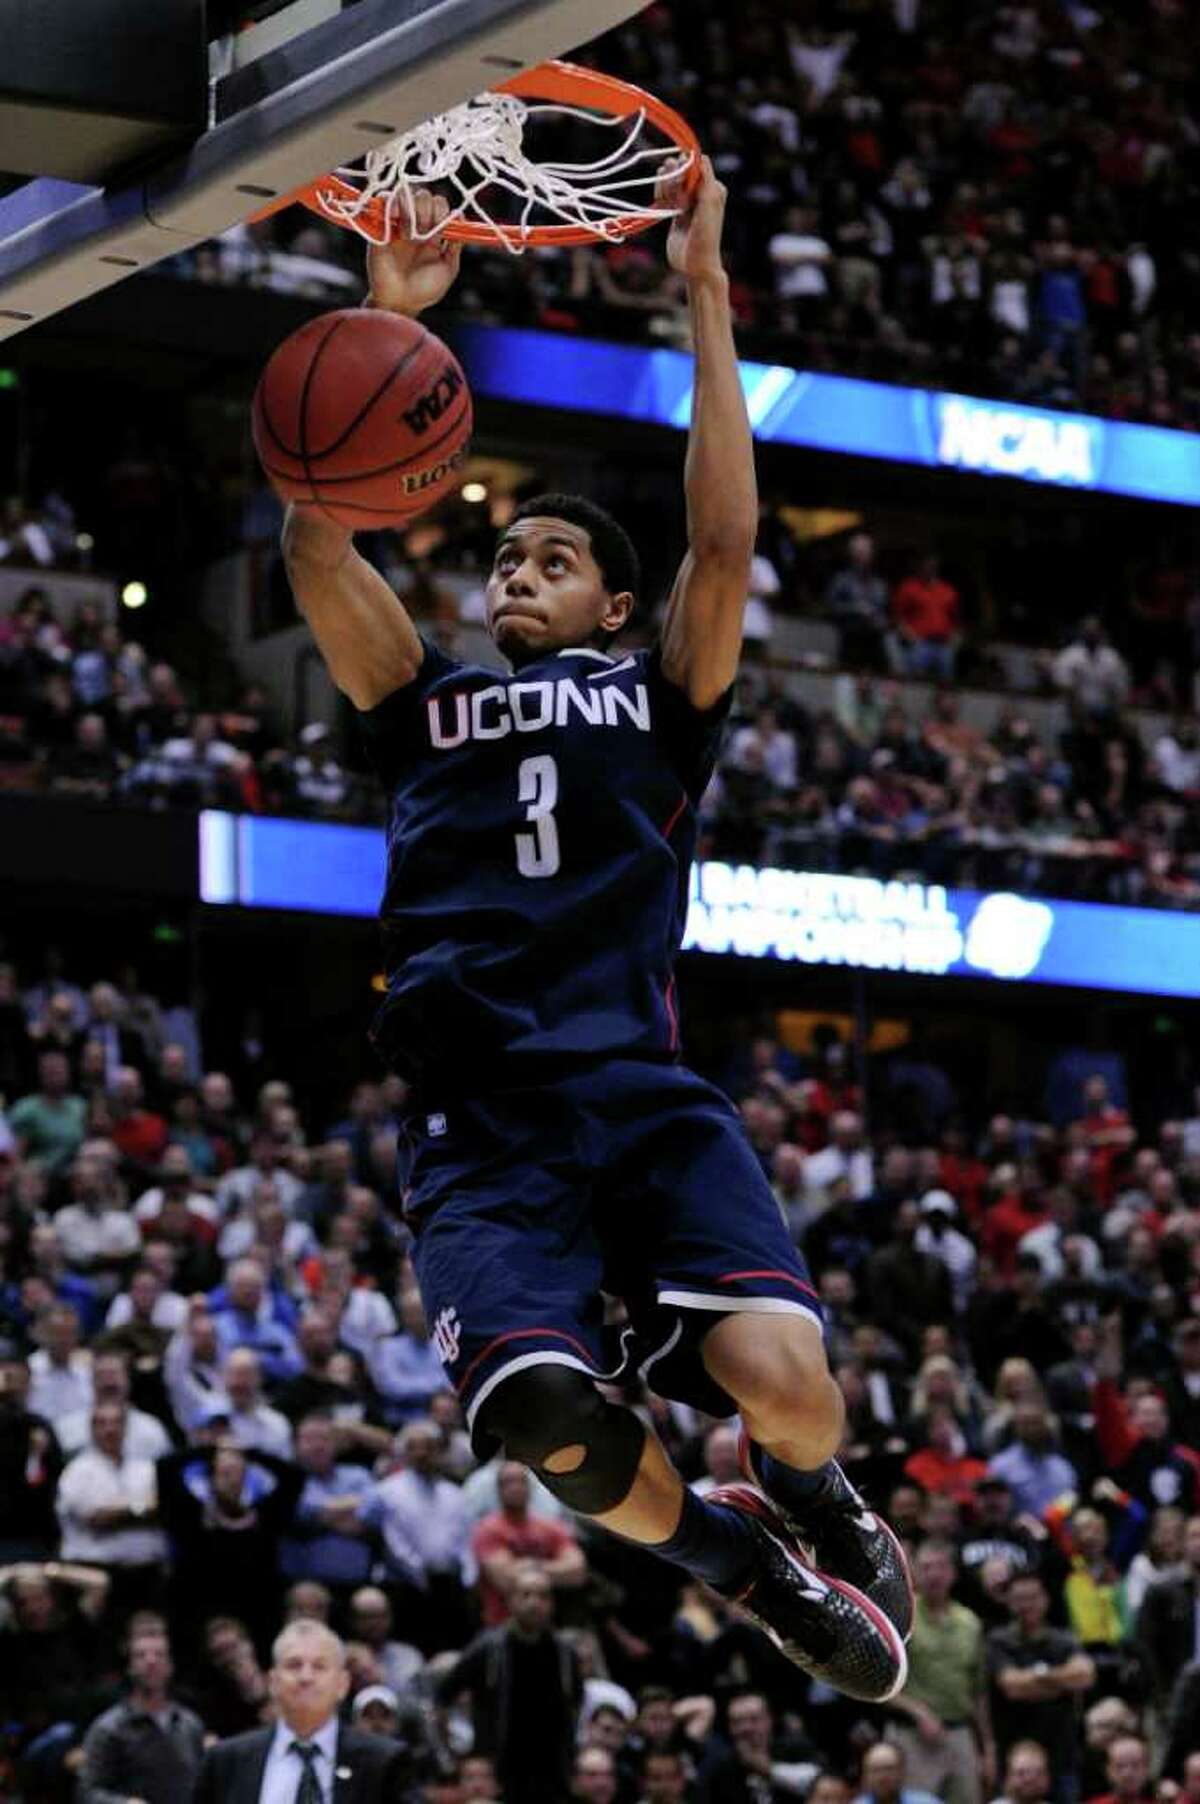 ANAHEIM, CA - MARCH 24: Jeremy Lamb #3 of the Connecticut Huskies dunks the ball towards the end of the game against of the San Diego State Aztecs during the west regional semifinal of the 2011 NCAA men's basketball tournament at the Honda Center on March 24, 2011 in Anaheim, California. (Photo by Harry How/Getty Images) *** Local Caption *** Jeremy Lamb